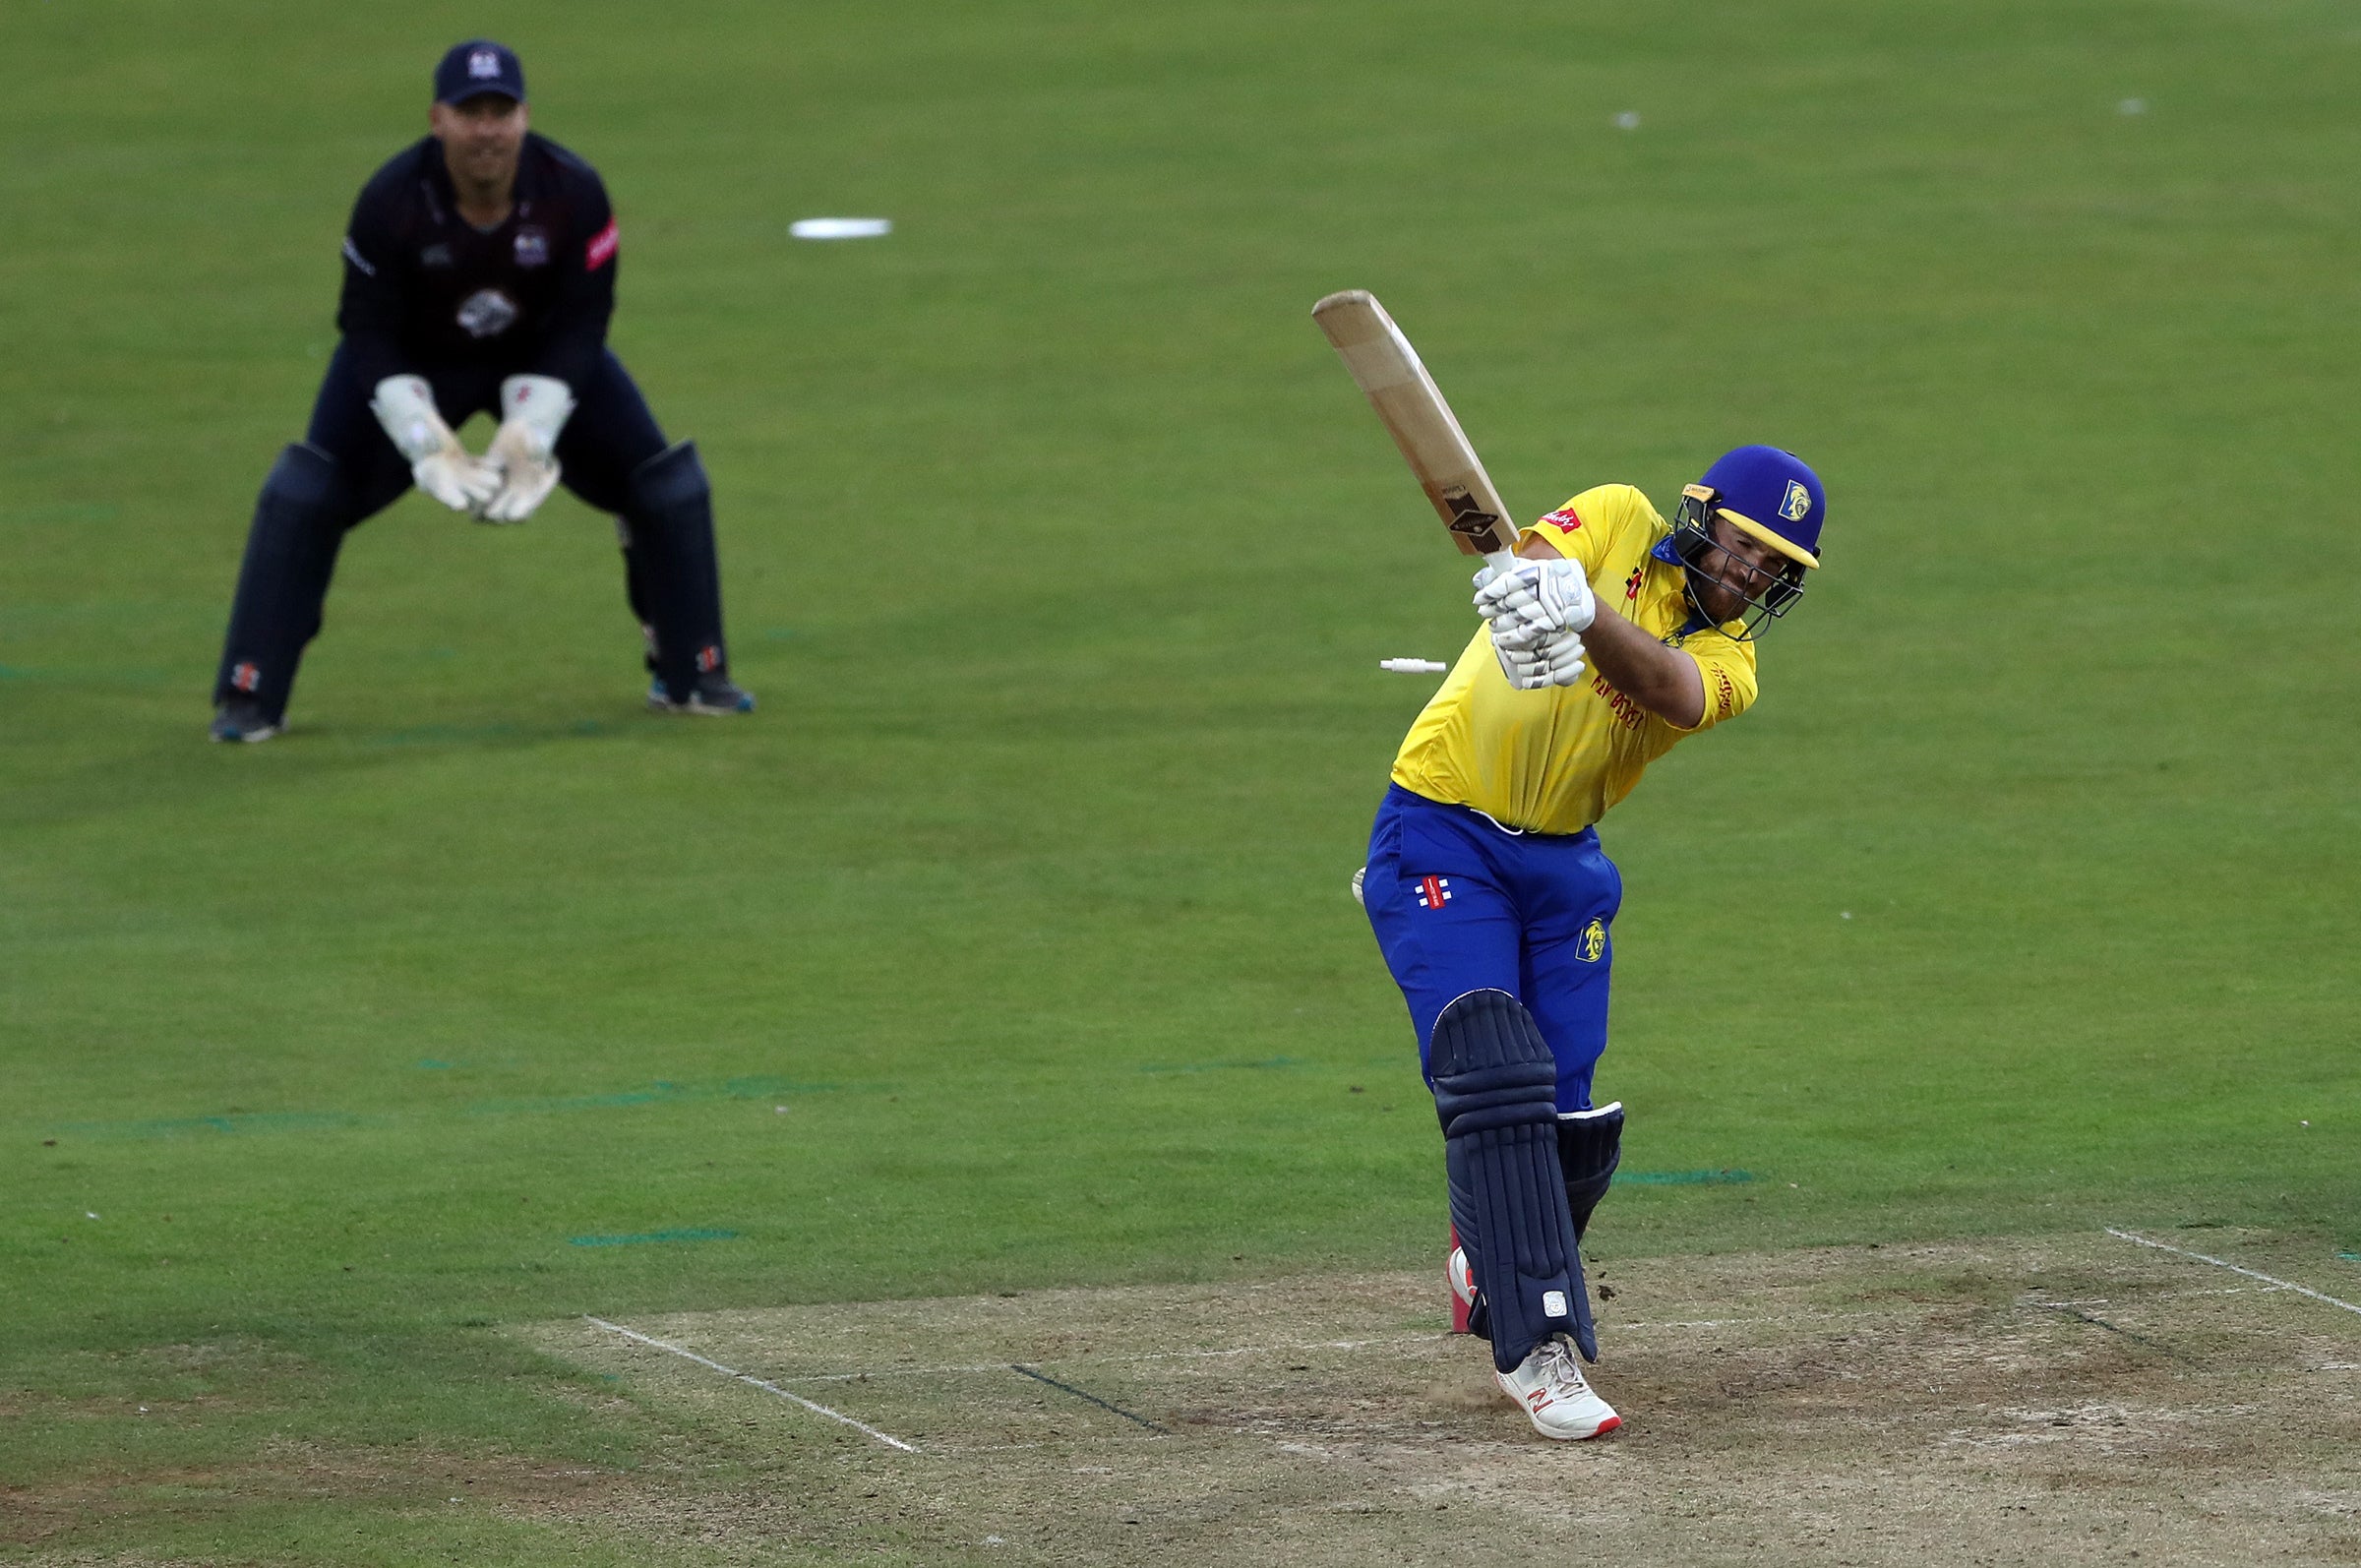 Graham Clark top scored with 141 as Durham posted their highest total in the Royal London Cup (Scott Heppell/PA)